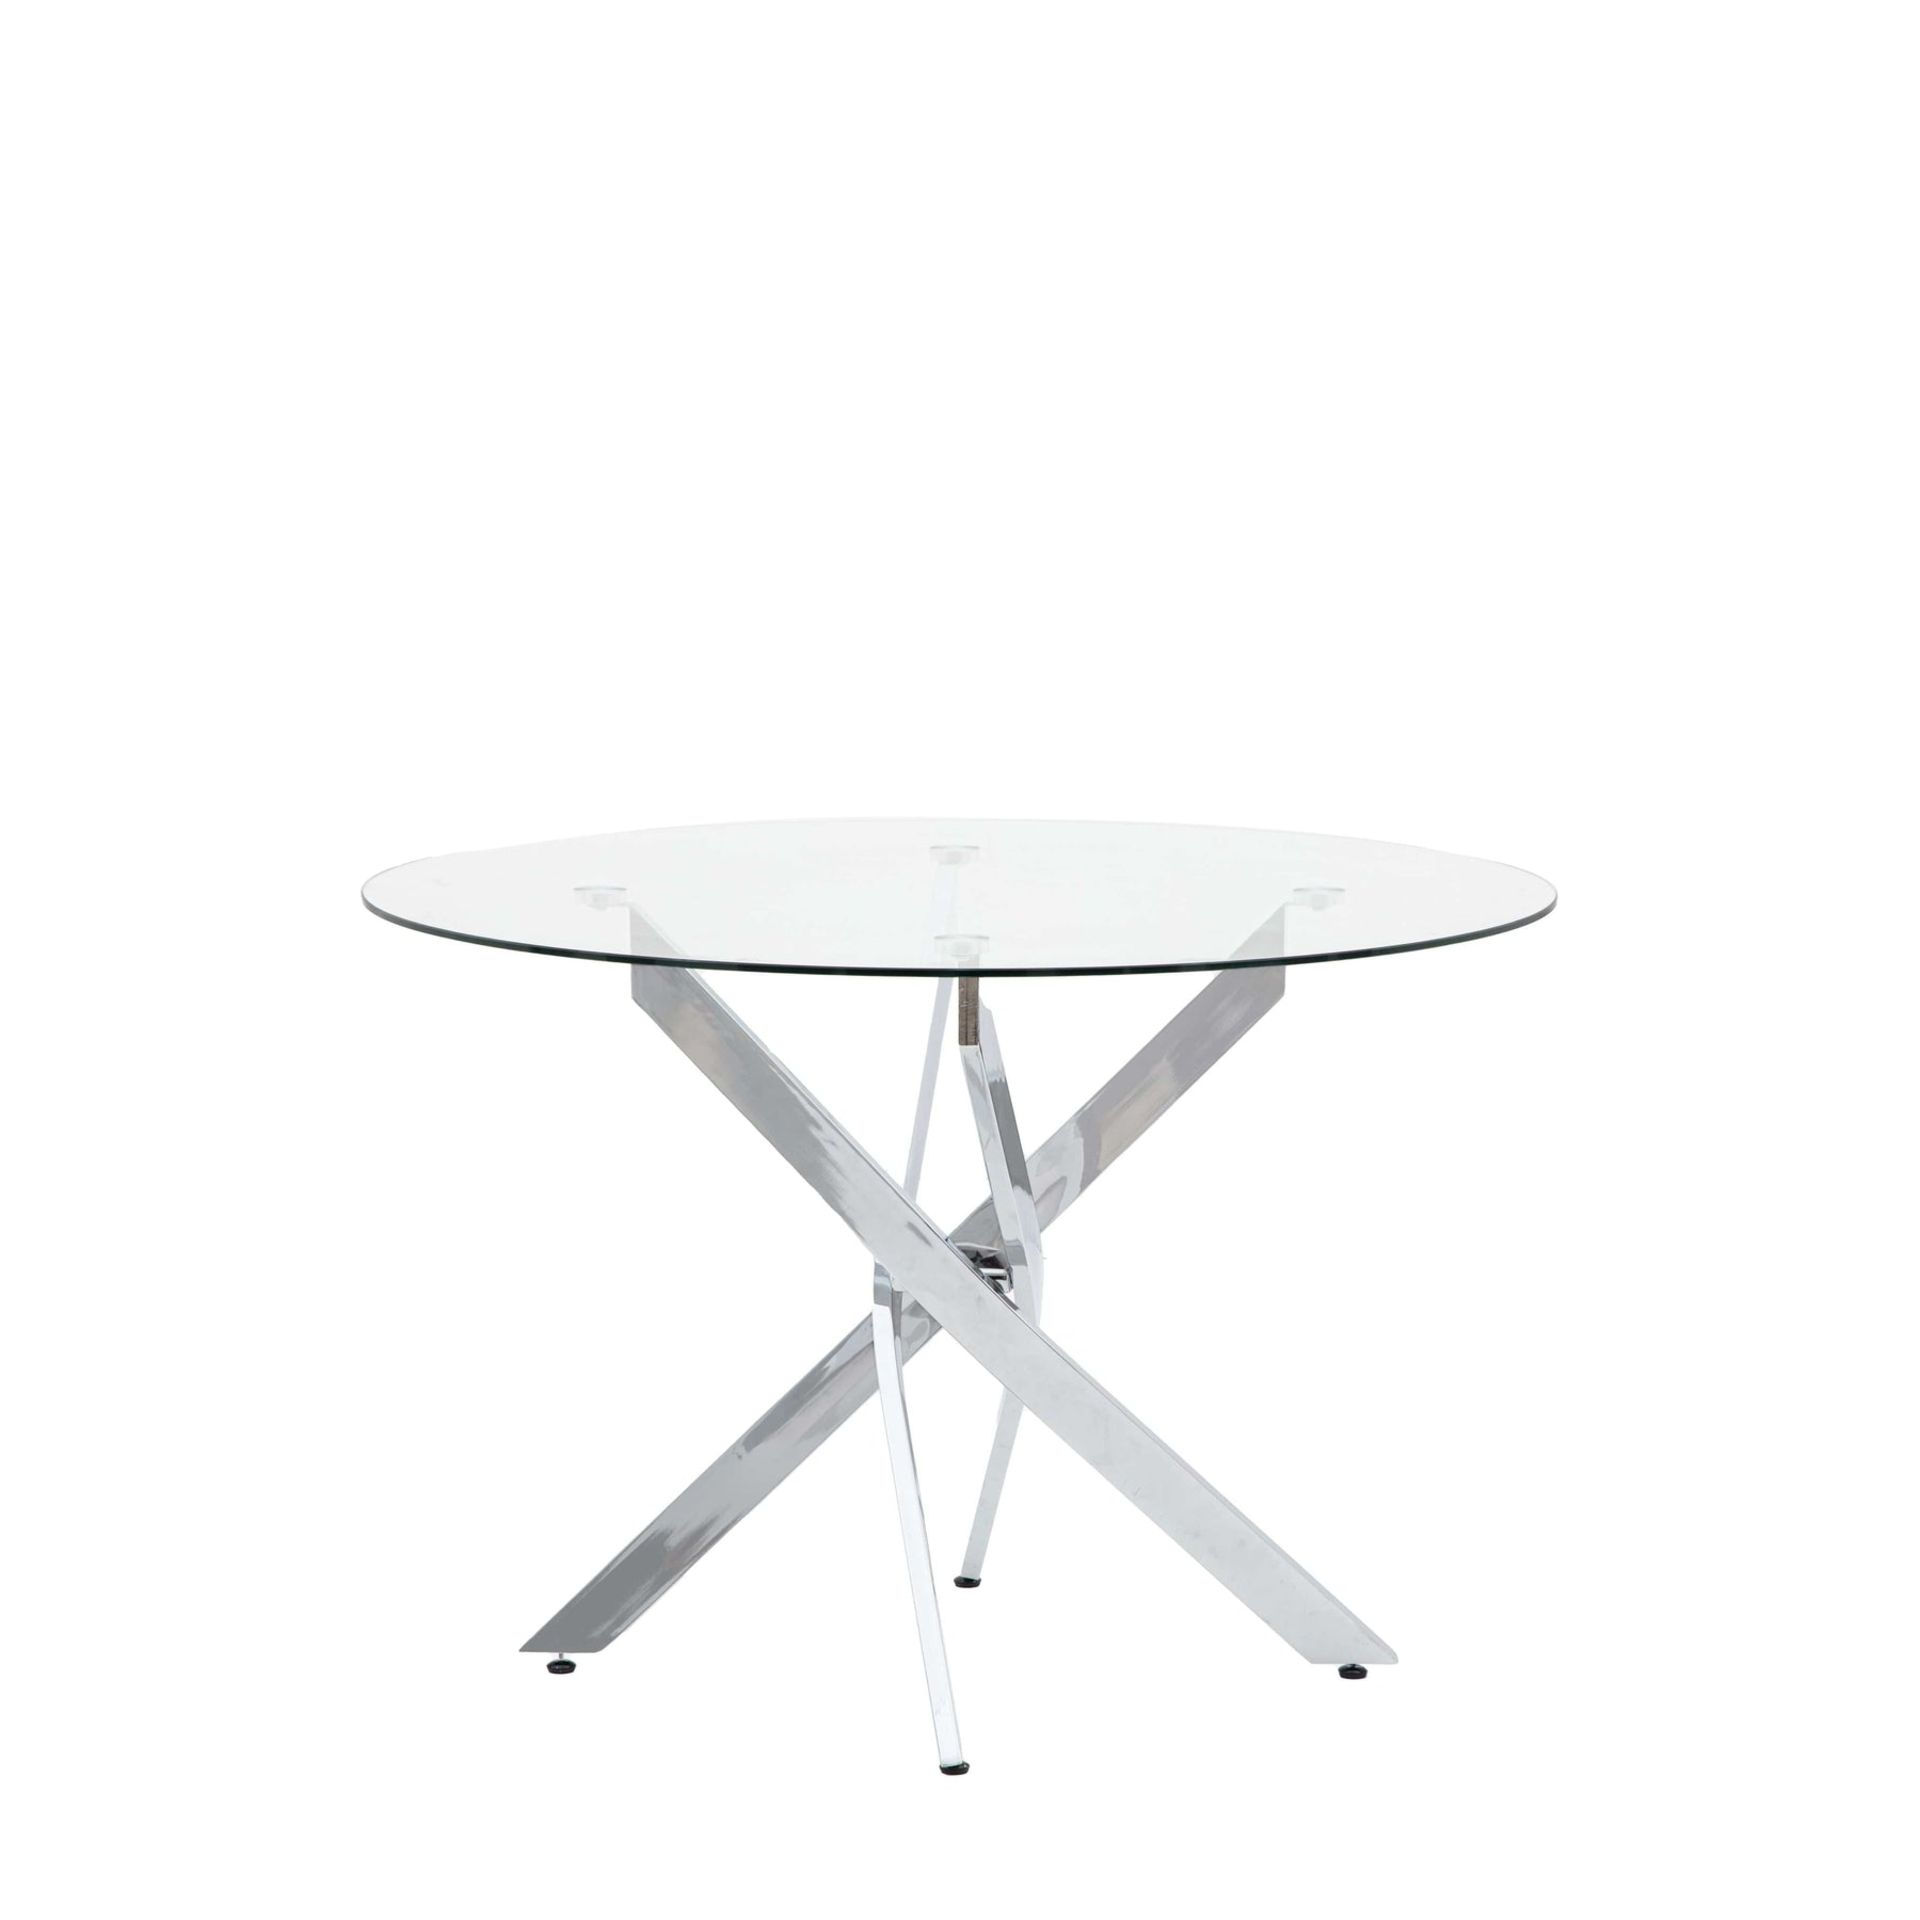 Hudson Gallery Ramsey Glass Dining Table - NEW - RRP Â£350+! - Image 2 of 4